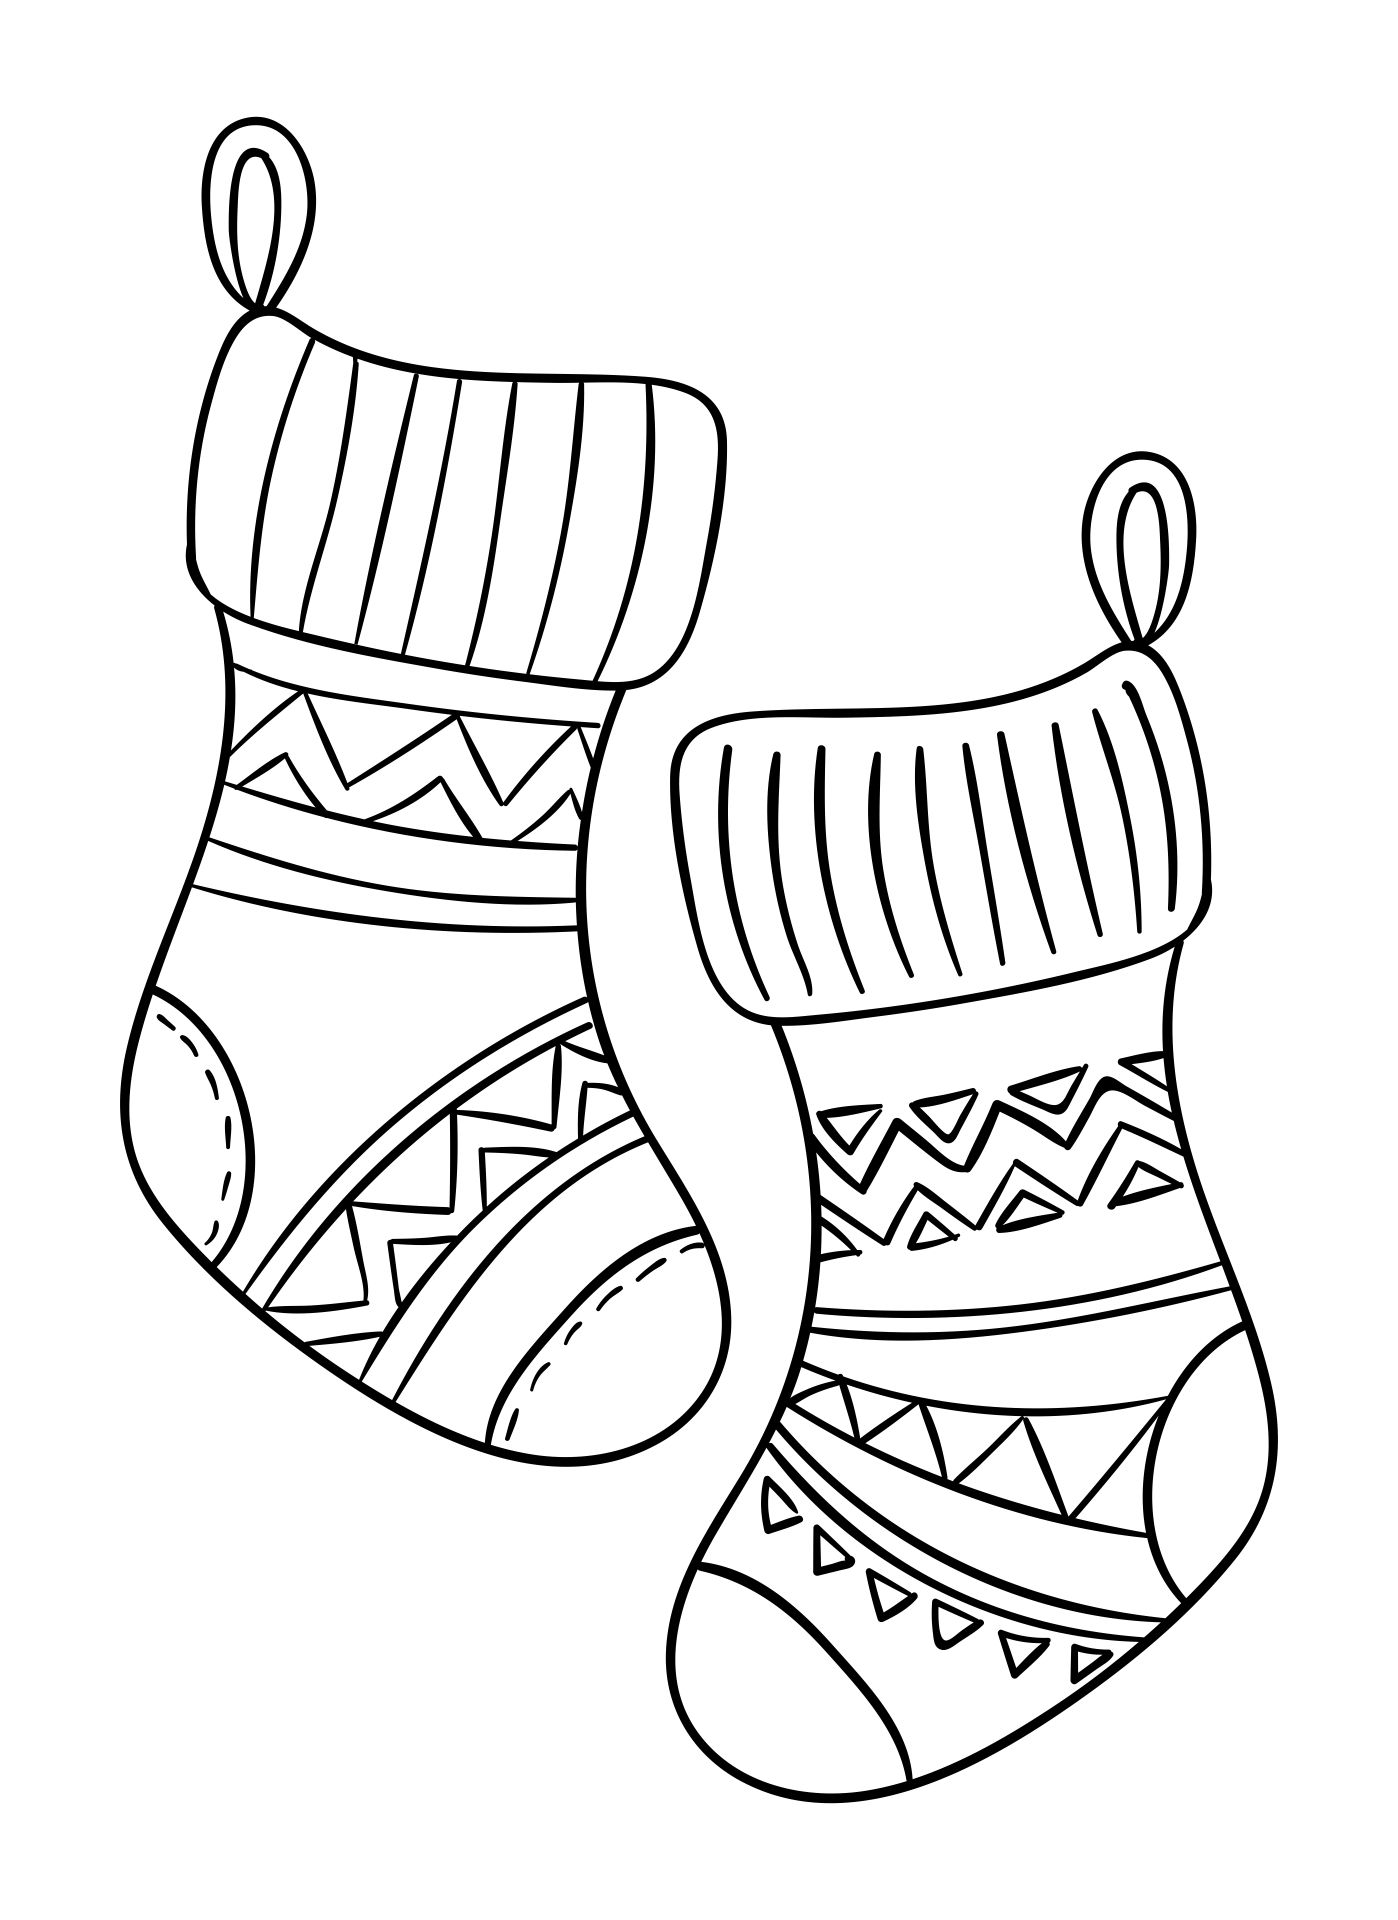 43+ beautiful images Stocking Coloring Page Printable Christmas